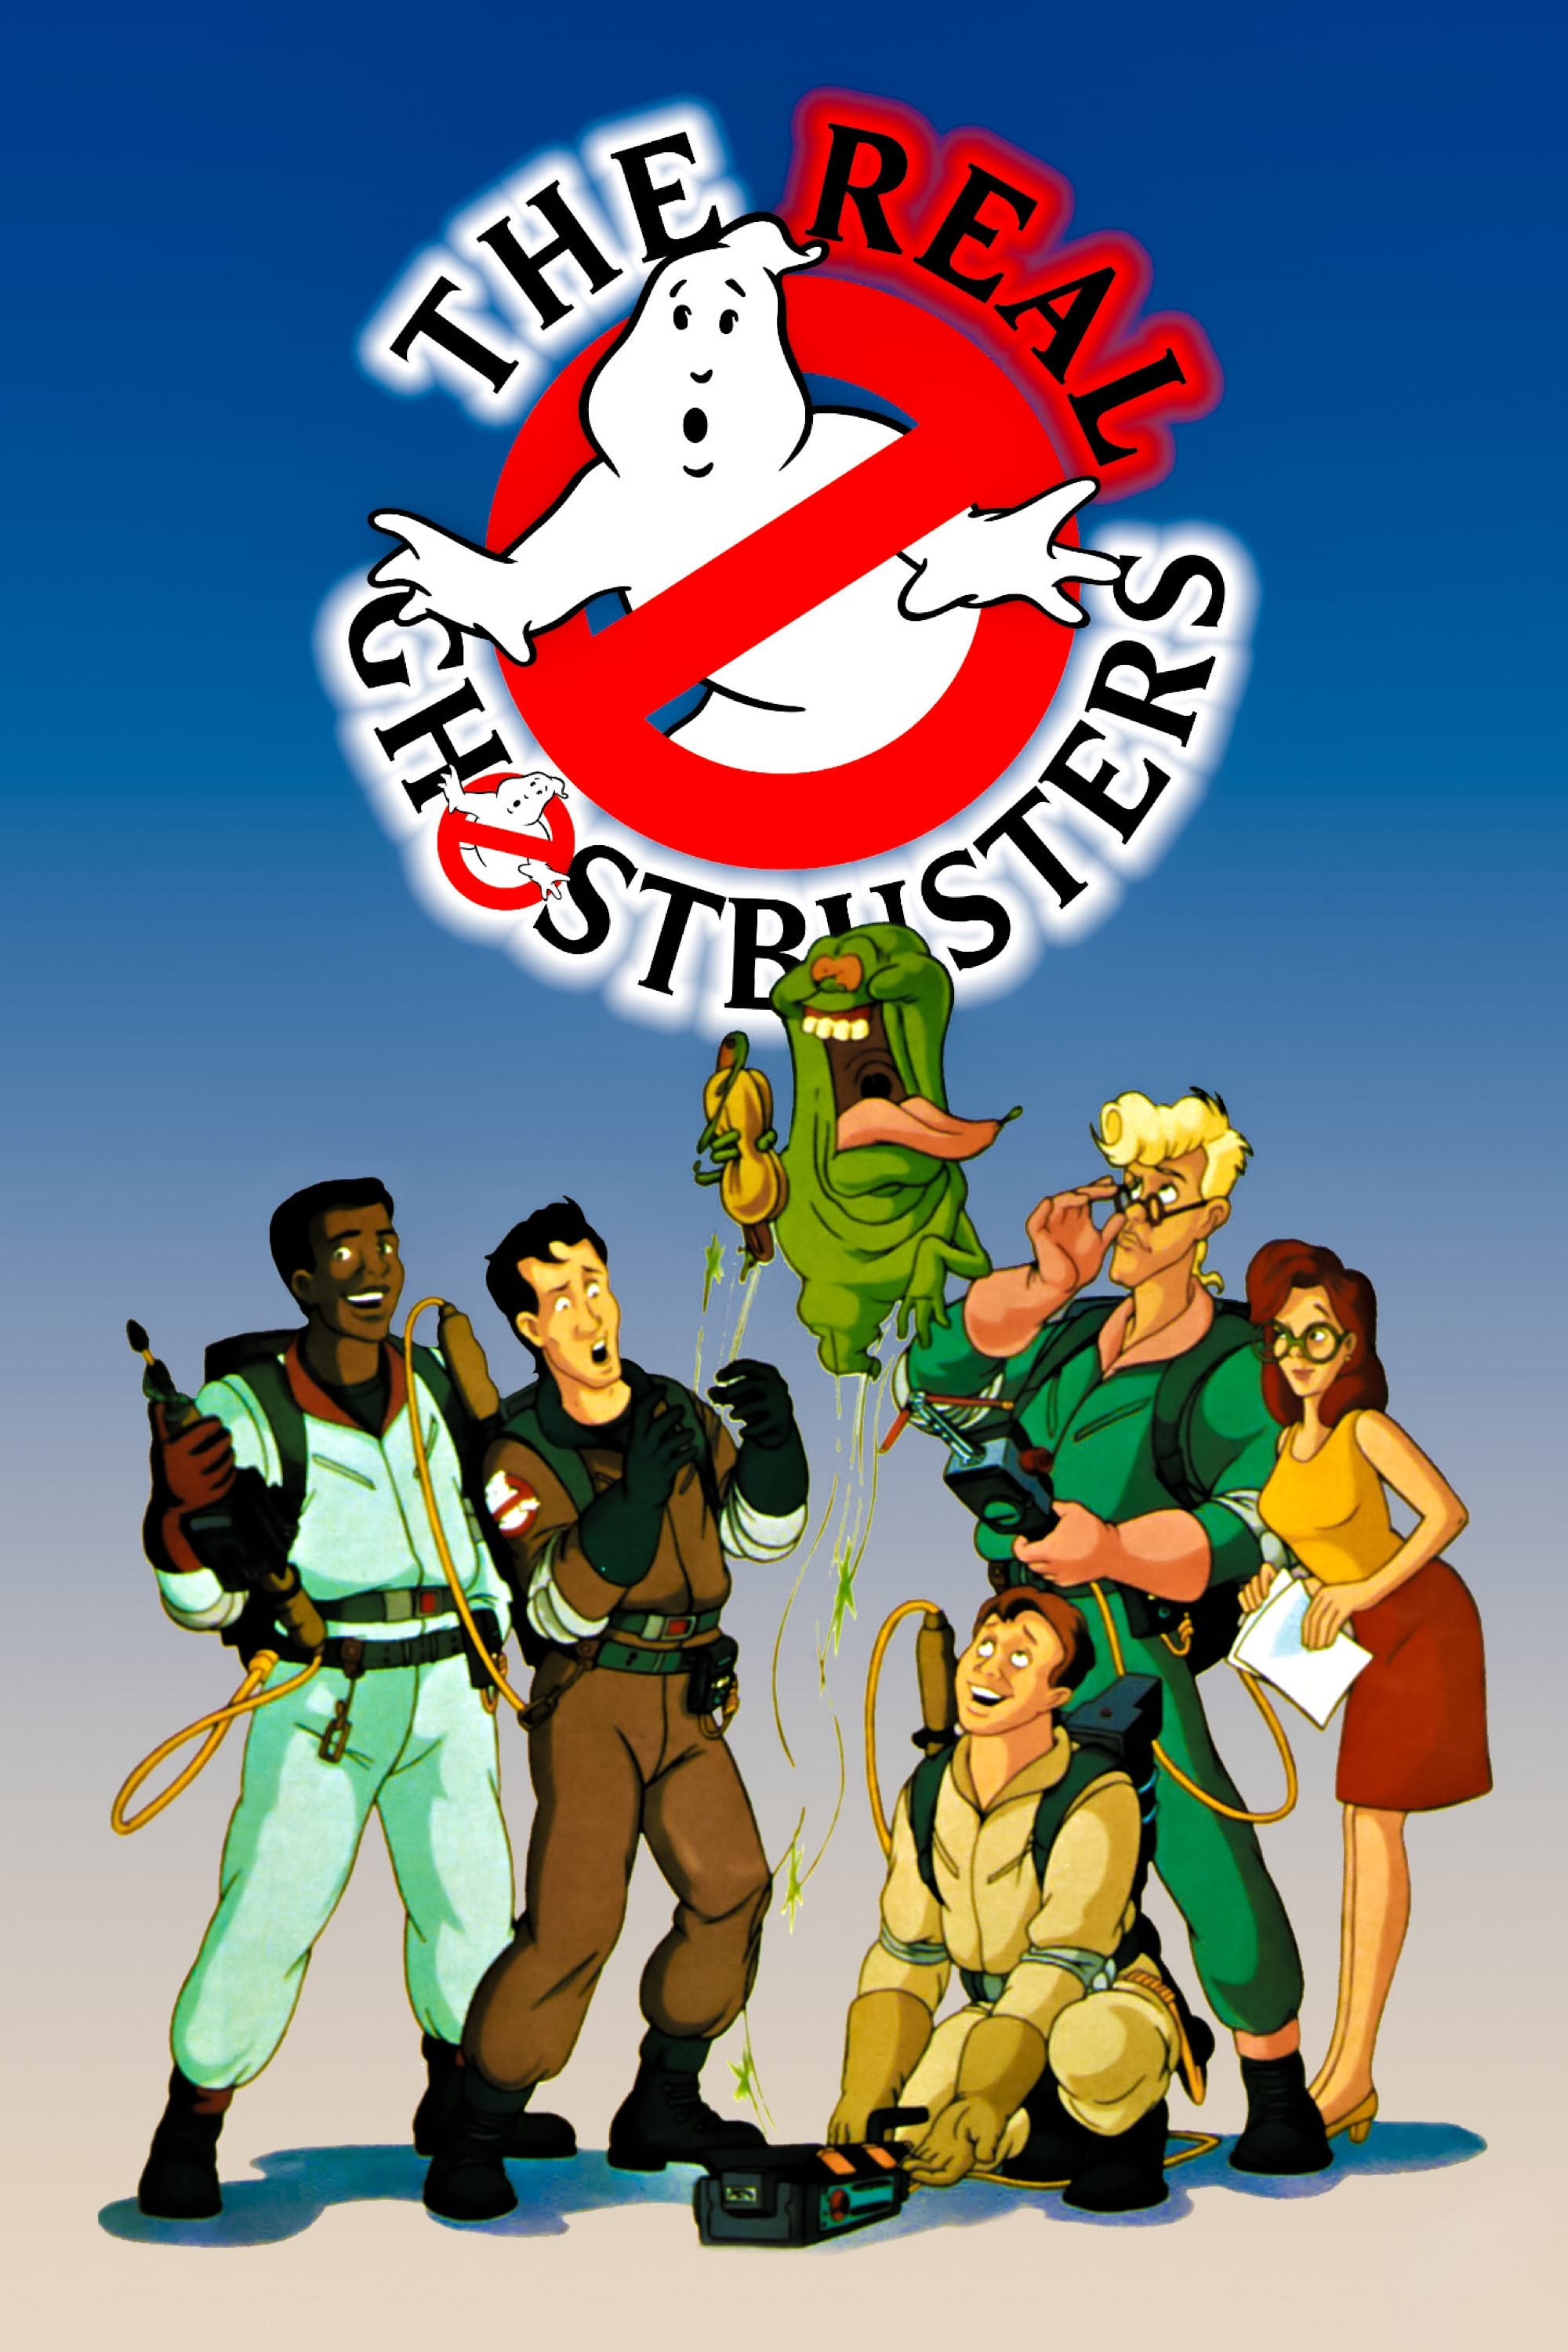 real ghostbusters the